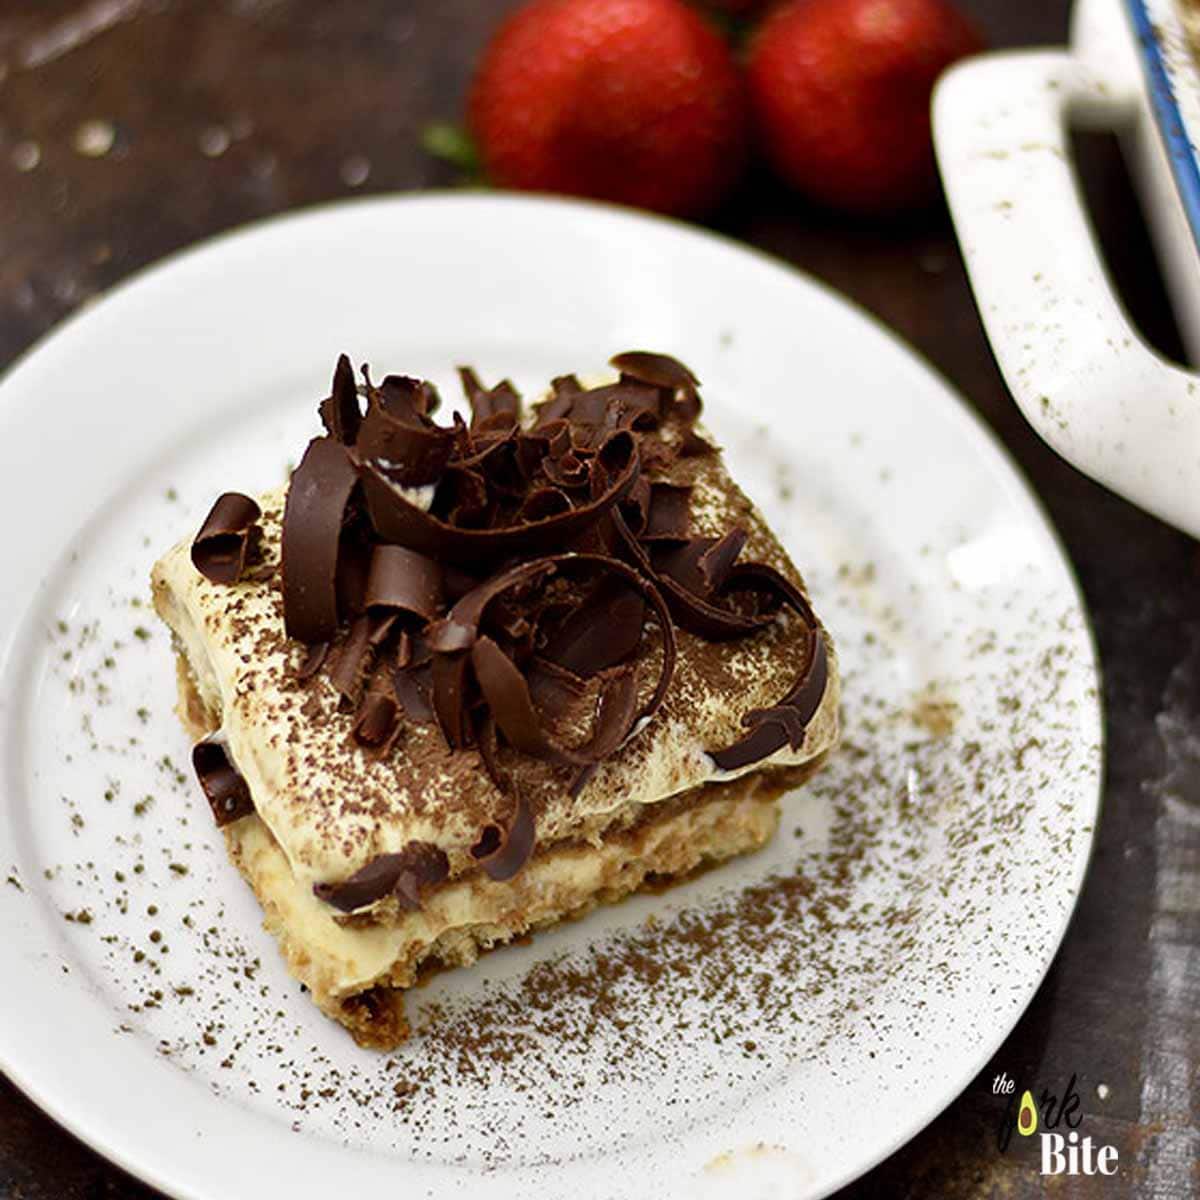 Nothing beats the real thing – creamy, delicious and decadent super easy Tiramisu recipe is truly one-size-fits-all for special occasions. Now you can have your Tiramisu and drink it too!